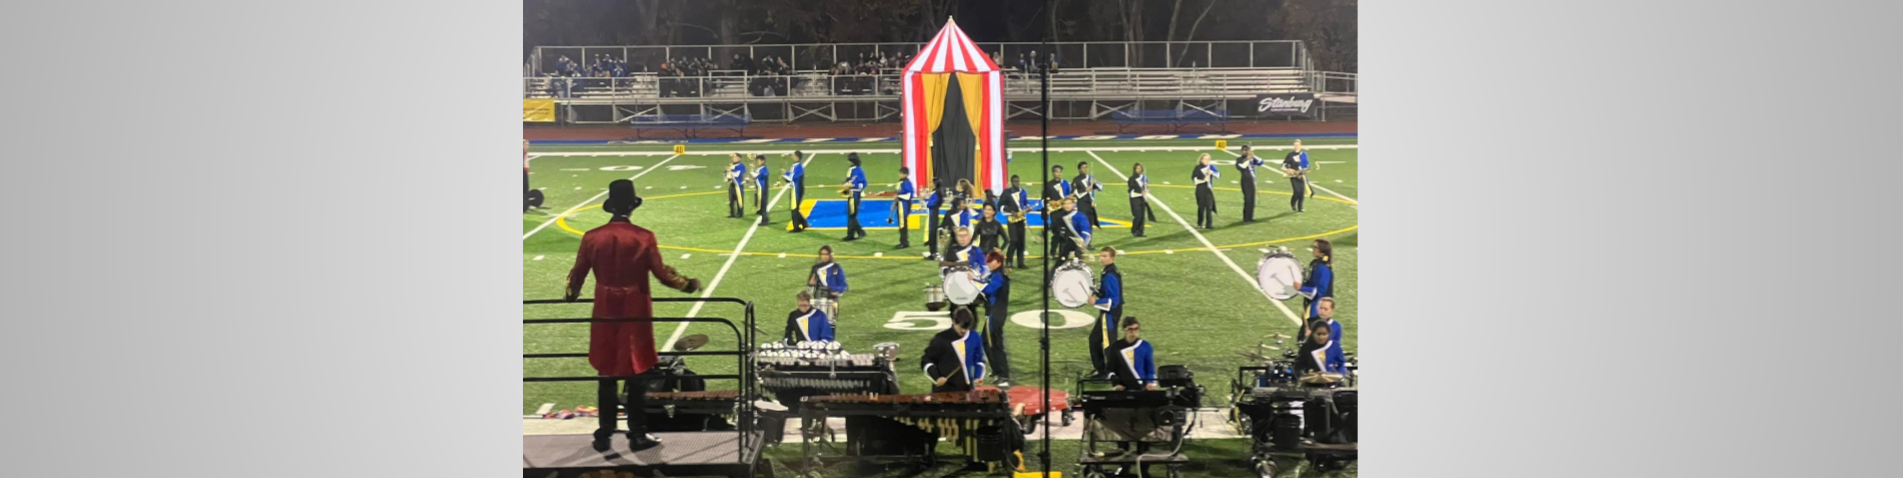 RHHS Band performing their night show "At the circus" 